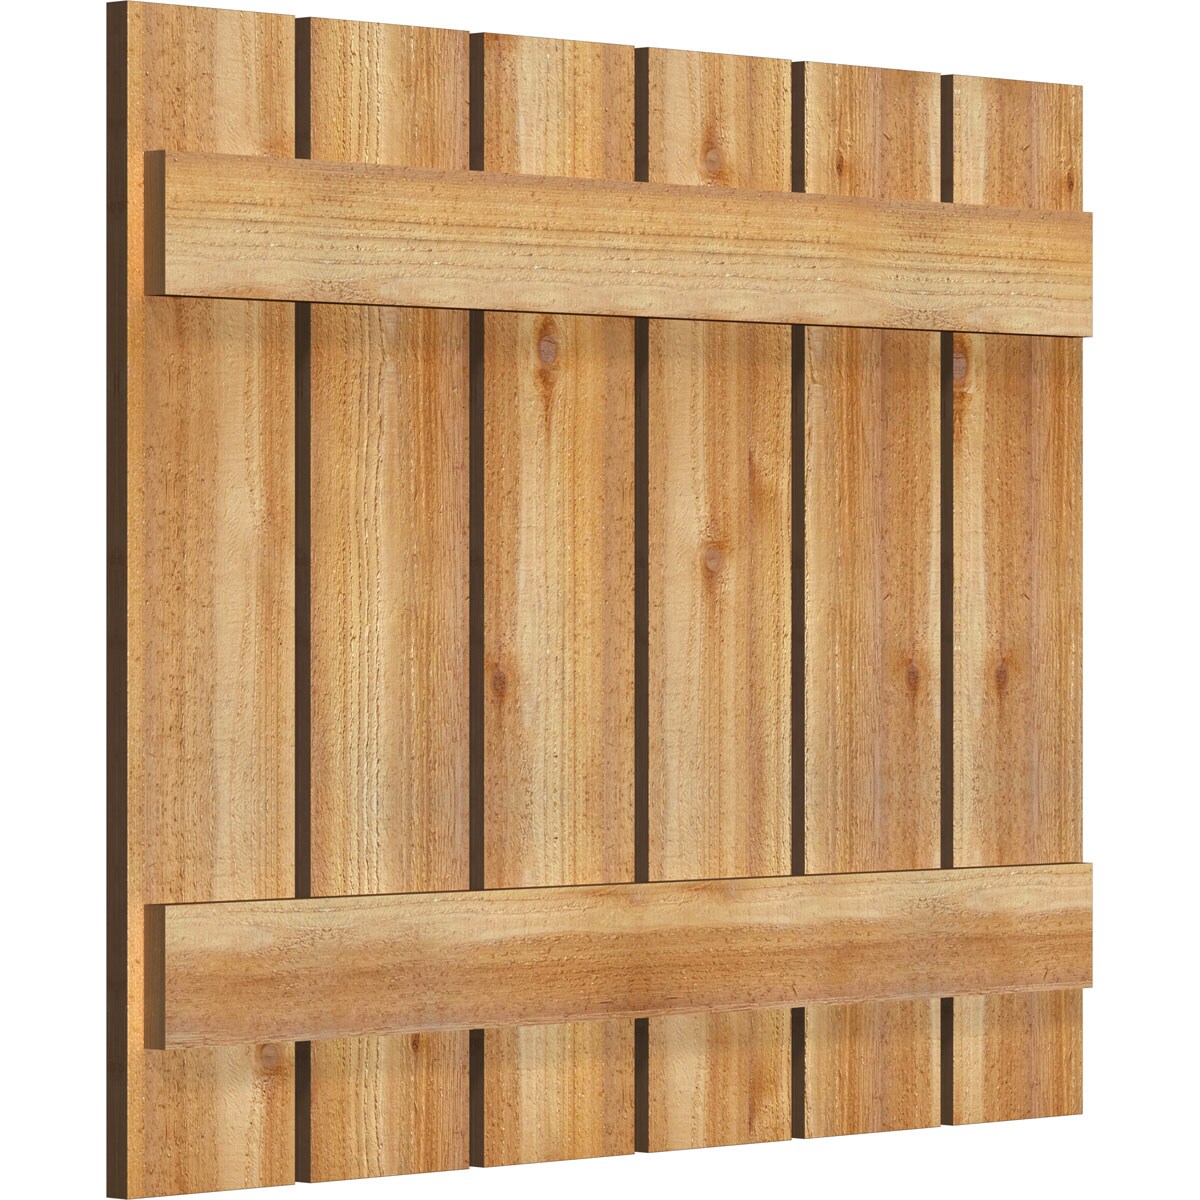 Ekena Millwork 2-Pack 34.75-in W x 28-in H Unfinished Board and Batten Spaced Wood Western Red cedar Exterior Shutters